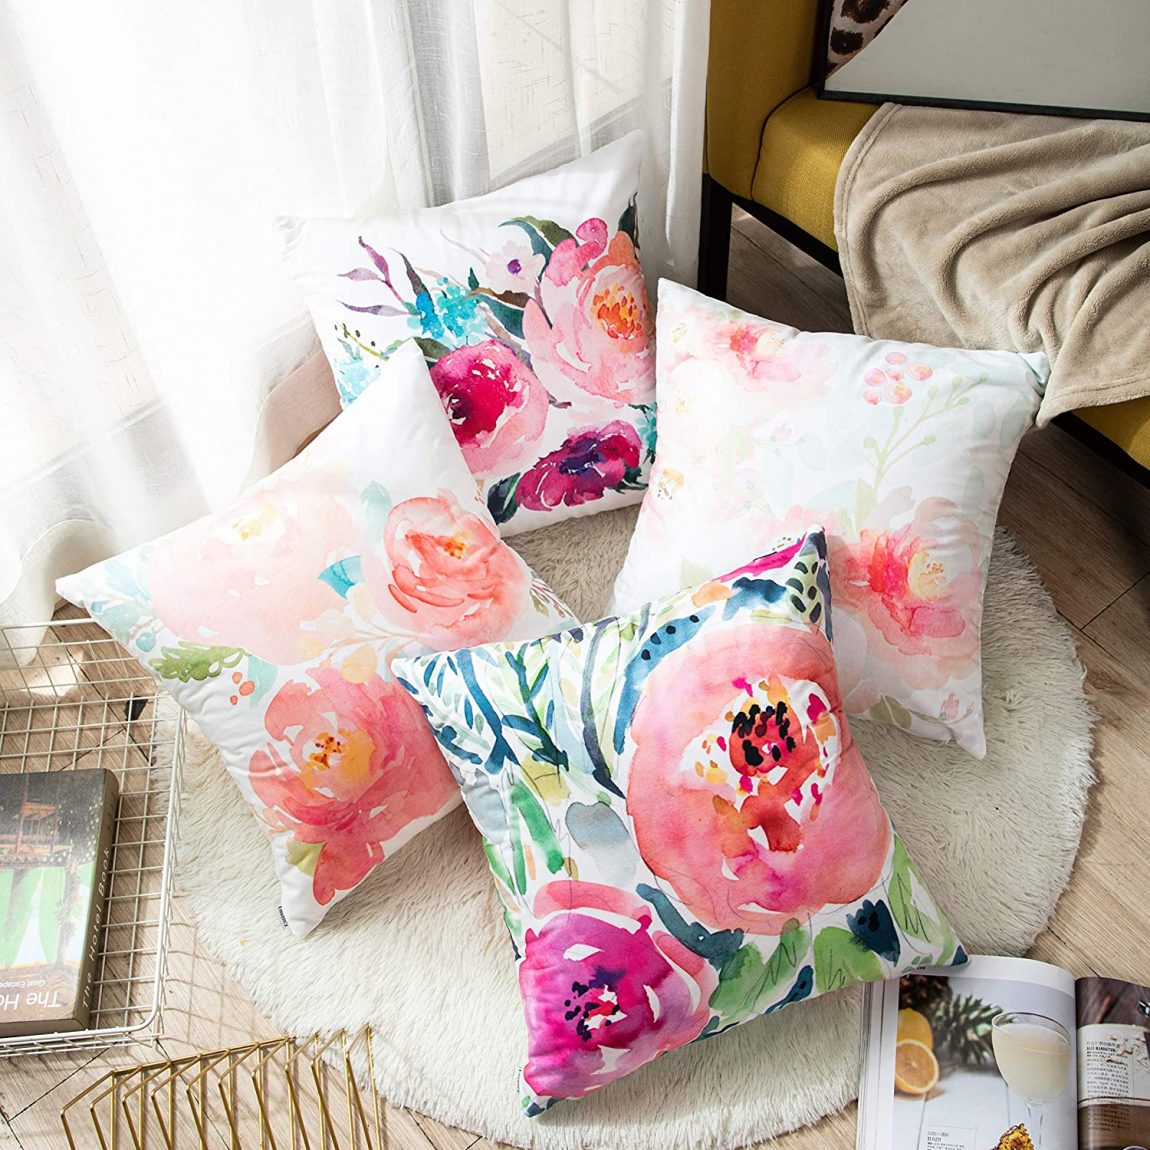 Glam Spring Decor - Spring Decorating Ideas On a Budget - Glam Decorative Throw Pillow Covers